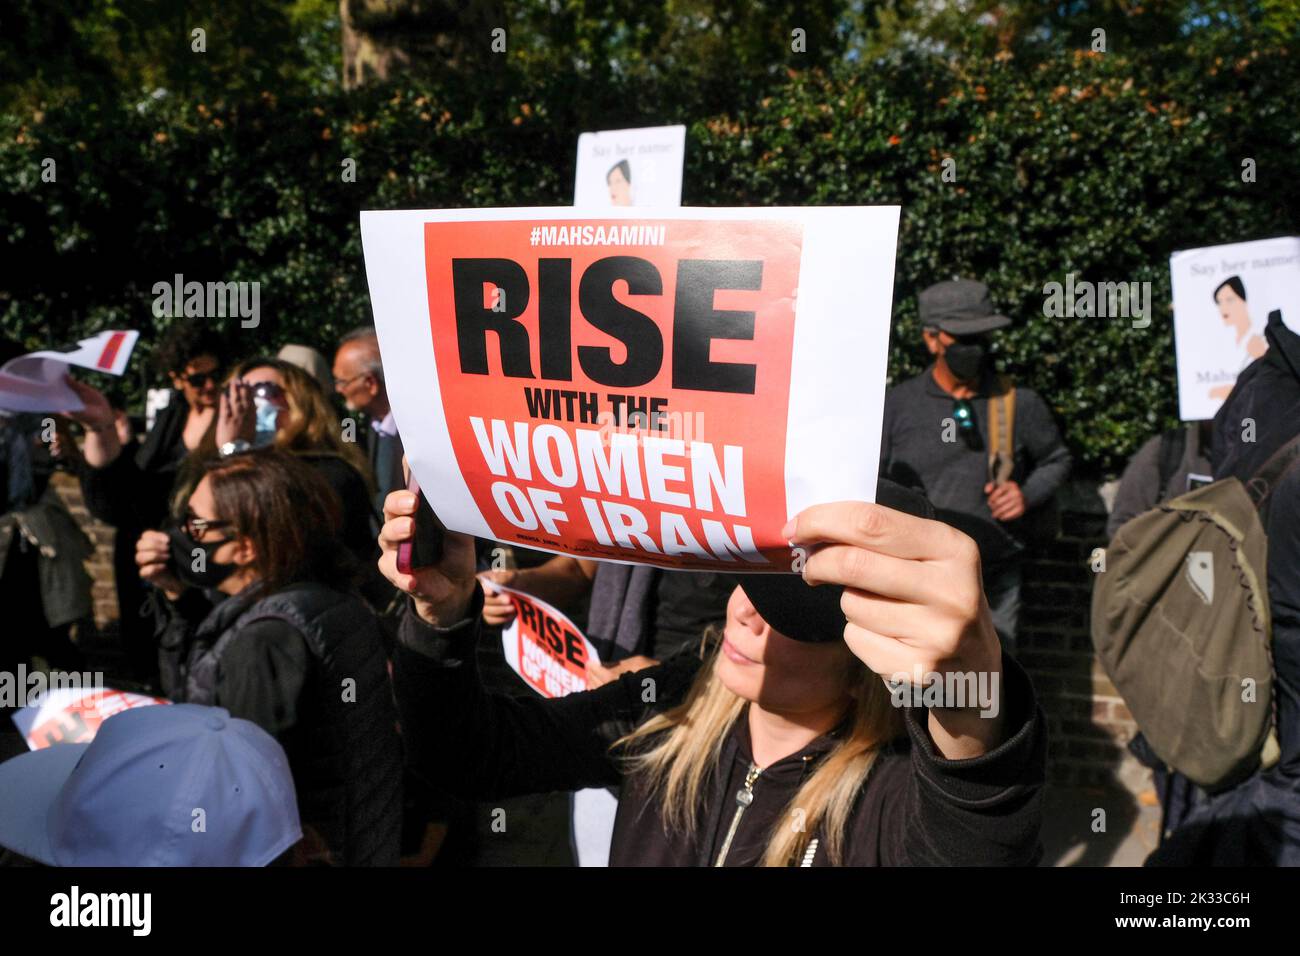 Iranian Embassy, London, UK. 24th Sept 2022. Protesters opposite the Iranian embassy against the death of Mahsa Amini in police custody in Iran.Credit: Matthew Chattle/Alamy Live News Stock Photo